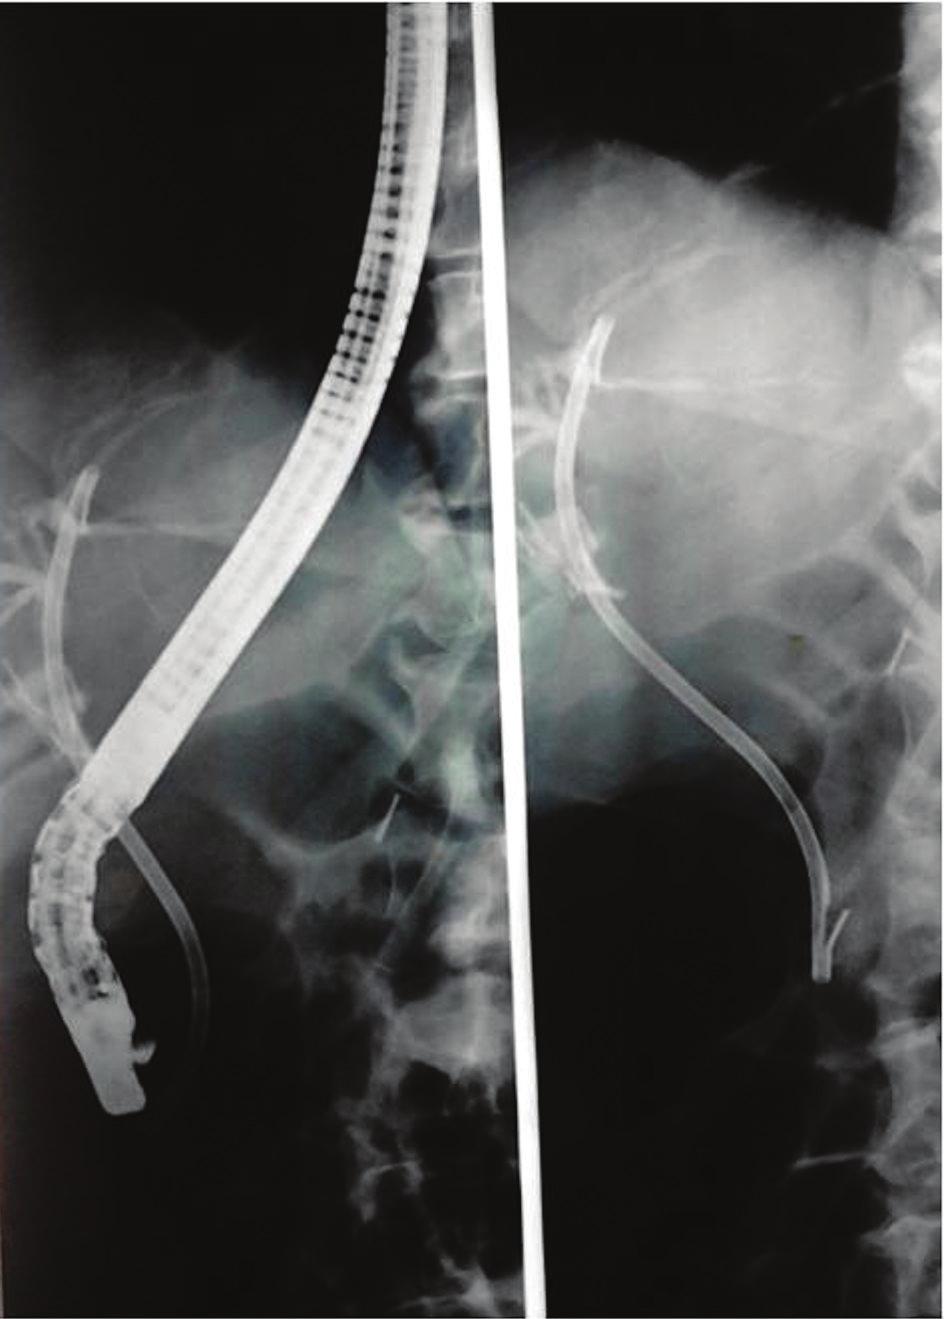 146 E. Perrakis et al. Figure 3. ERC and stent. leakage enabled its removal in 2-6 weeks.